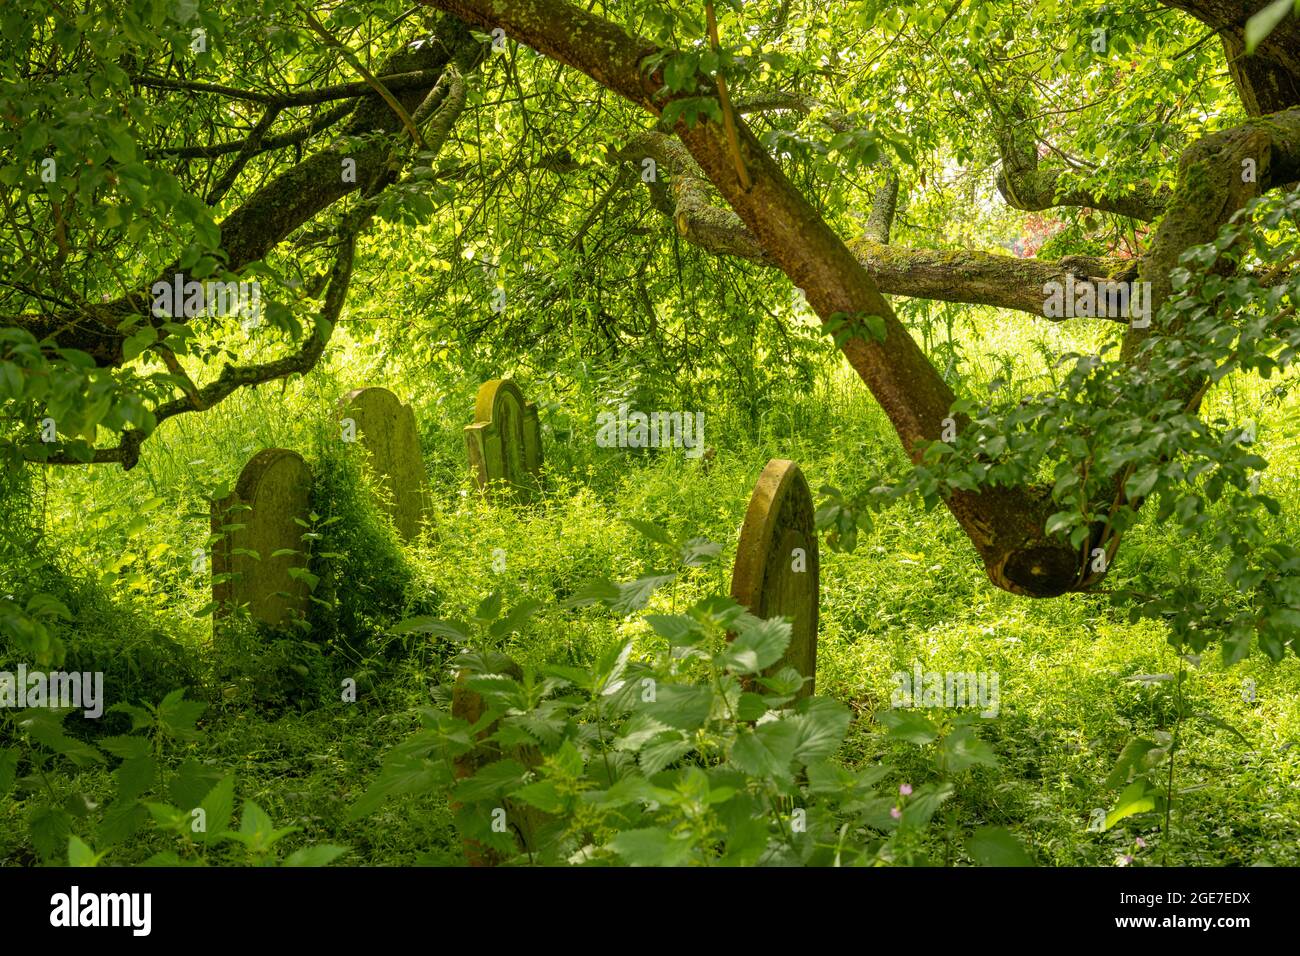 The wild area of the graveyard of St Margaret’s church Margaretting Essex Stock Photo